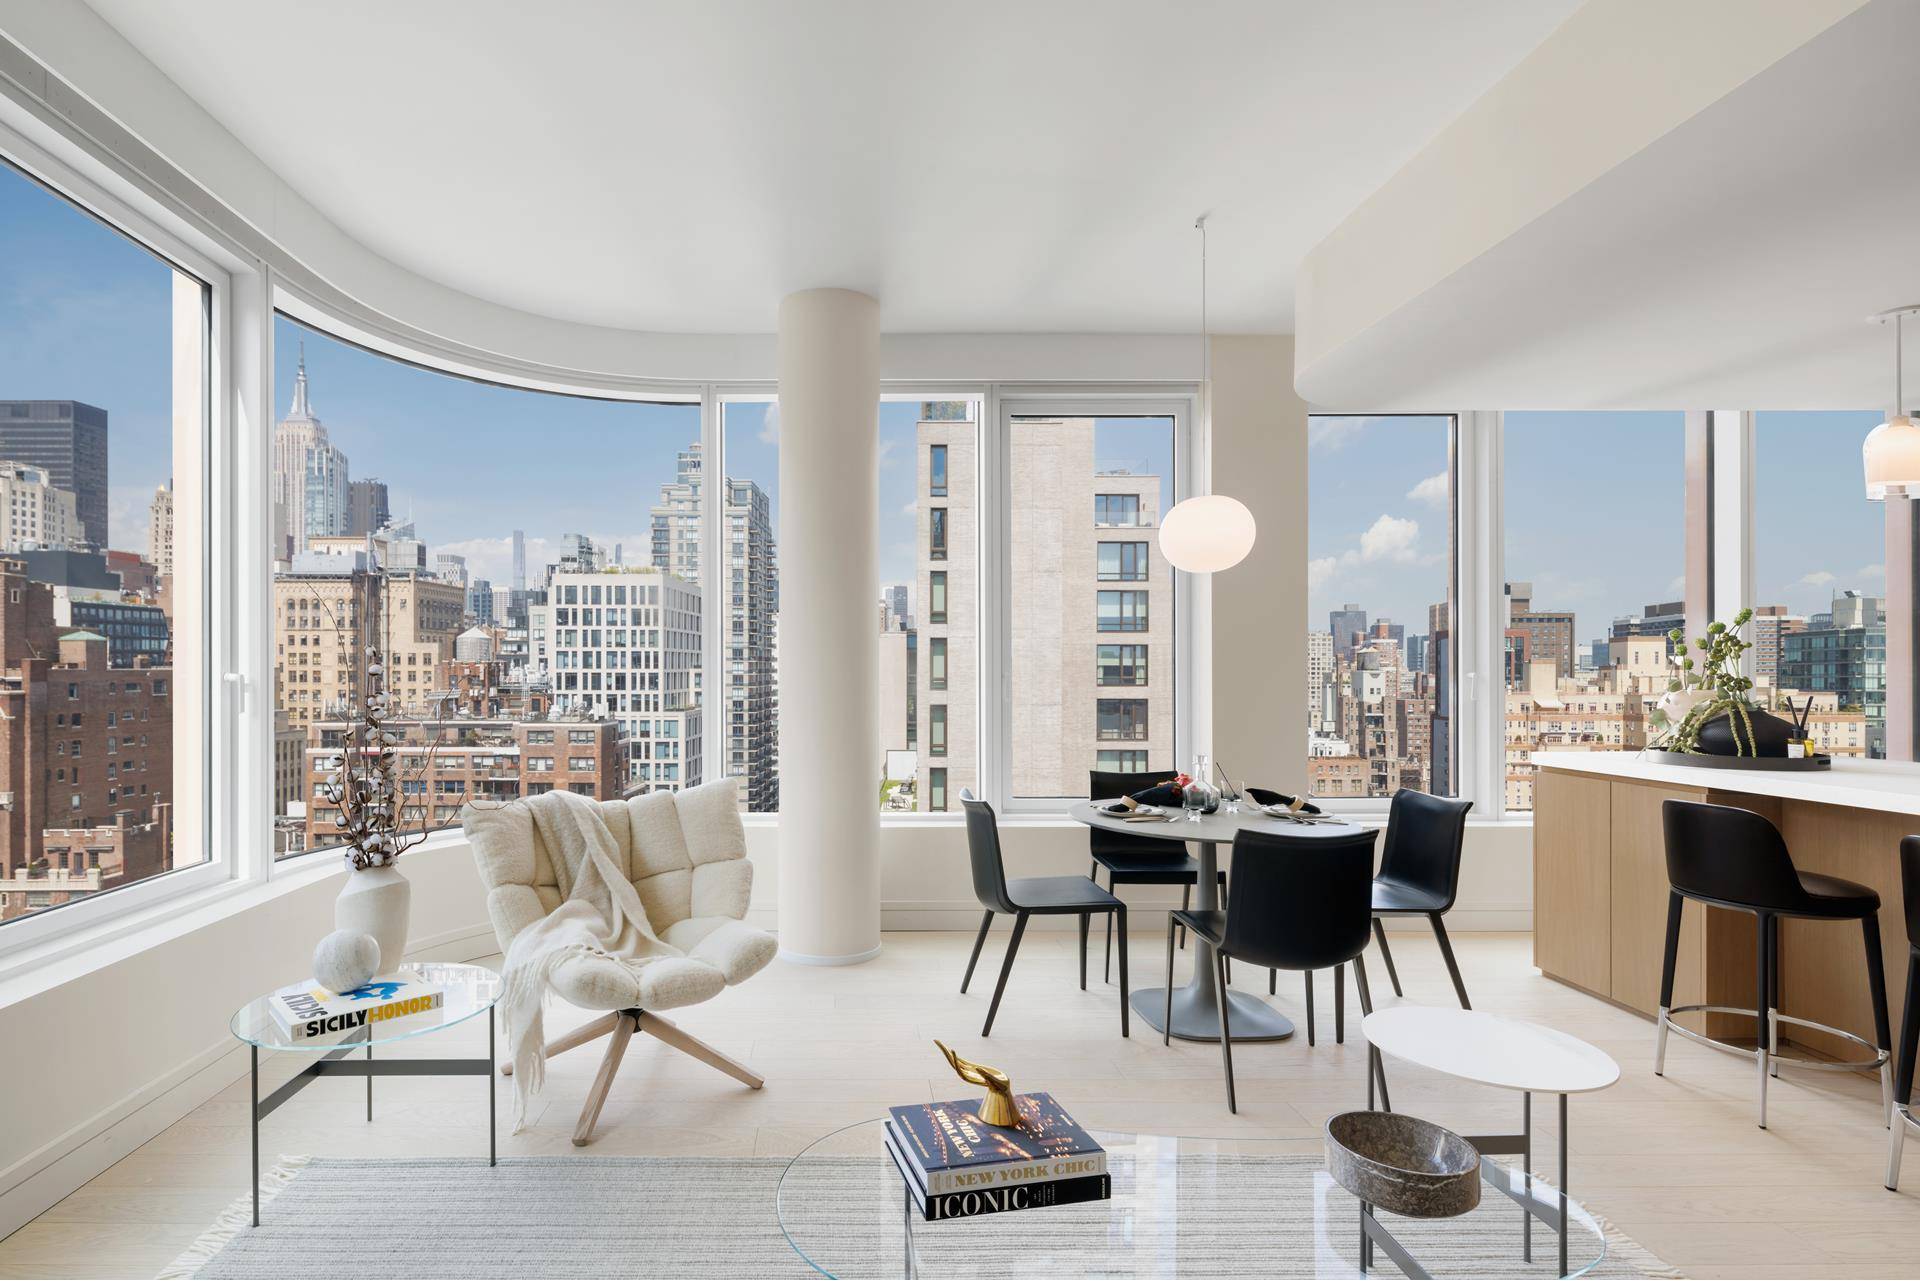 Immediate occupancy. A delicate curve, an elegantly articulated line the exquisite craft of 200 East 20th is expressed through restrained silhouettes, expressive detail and indulgent tactility.